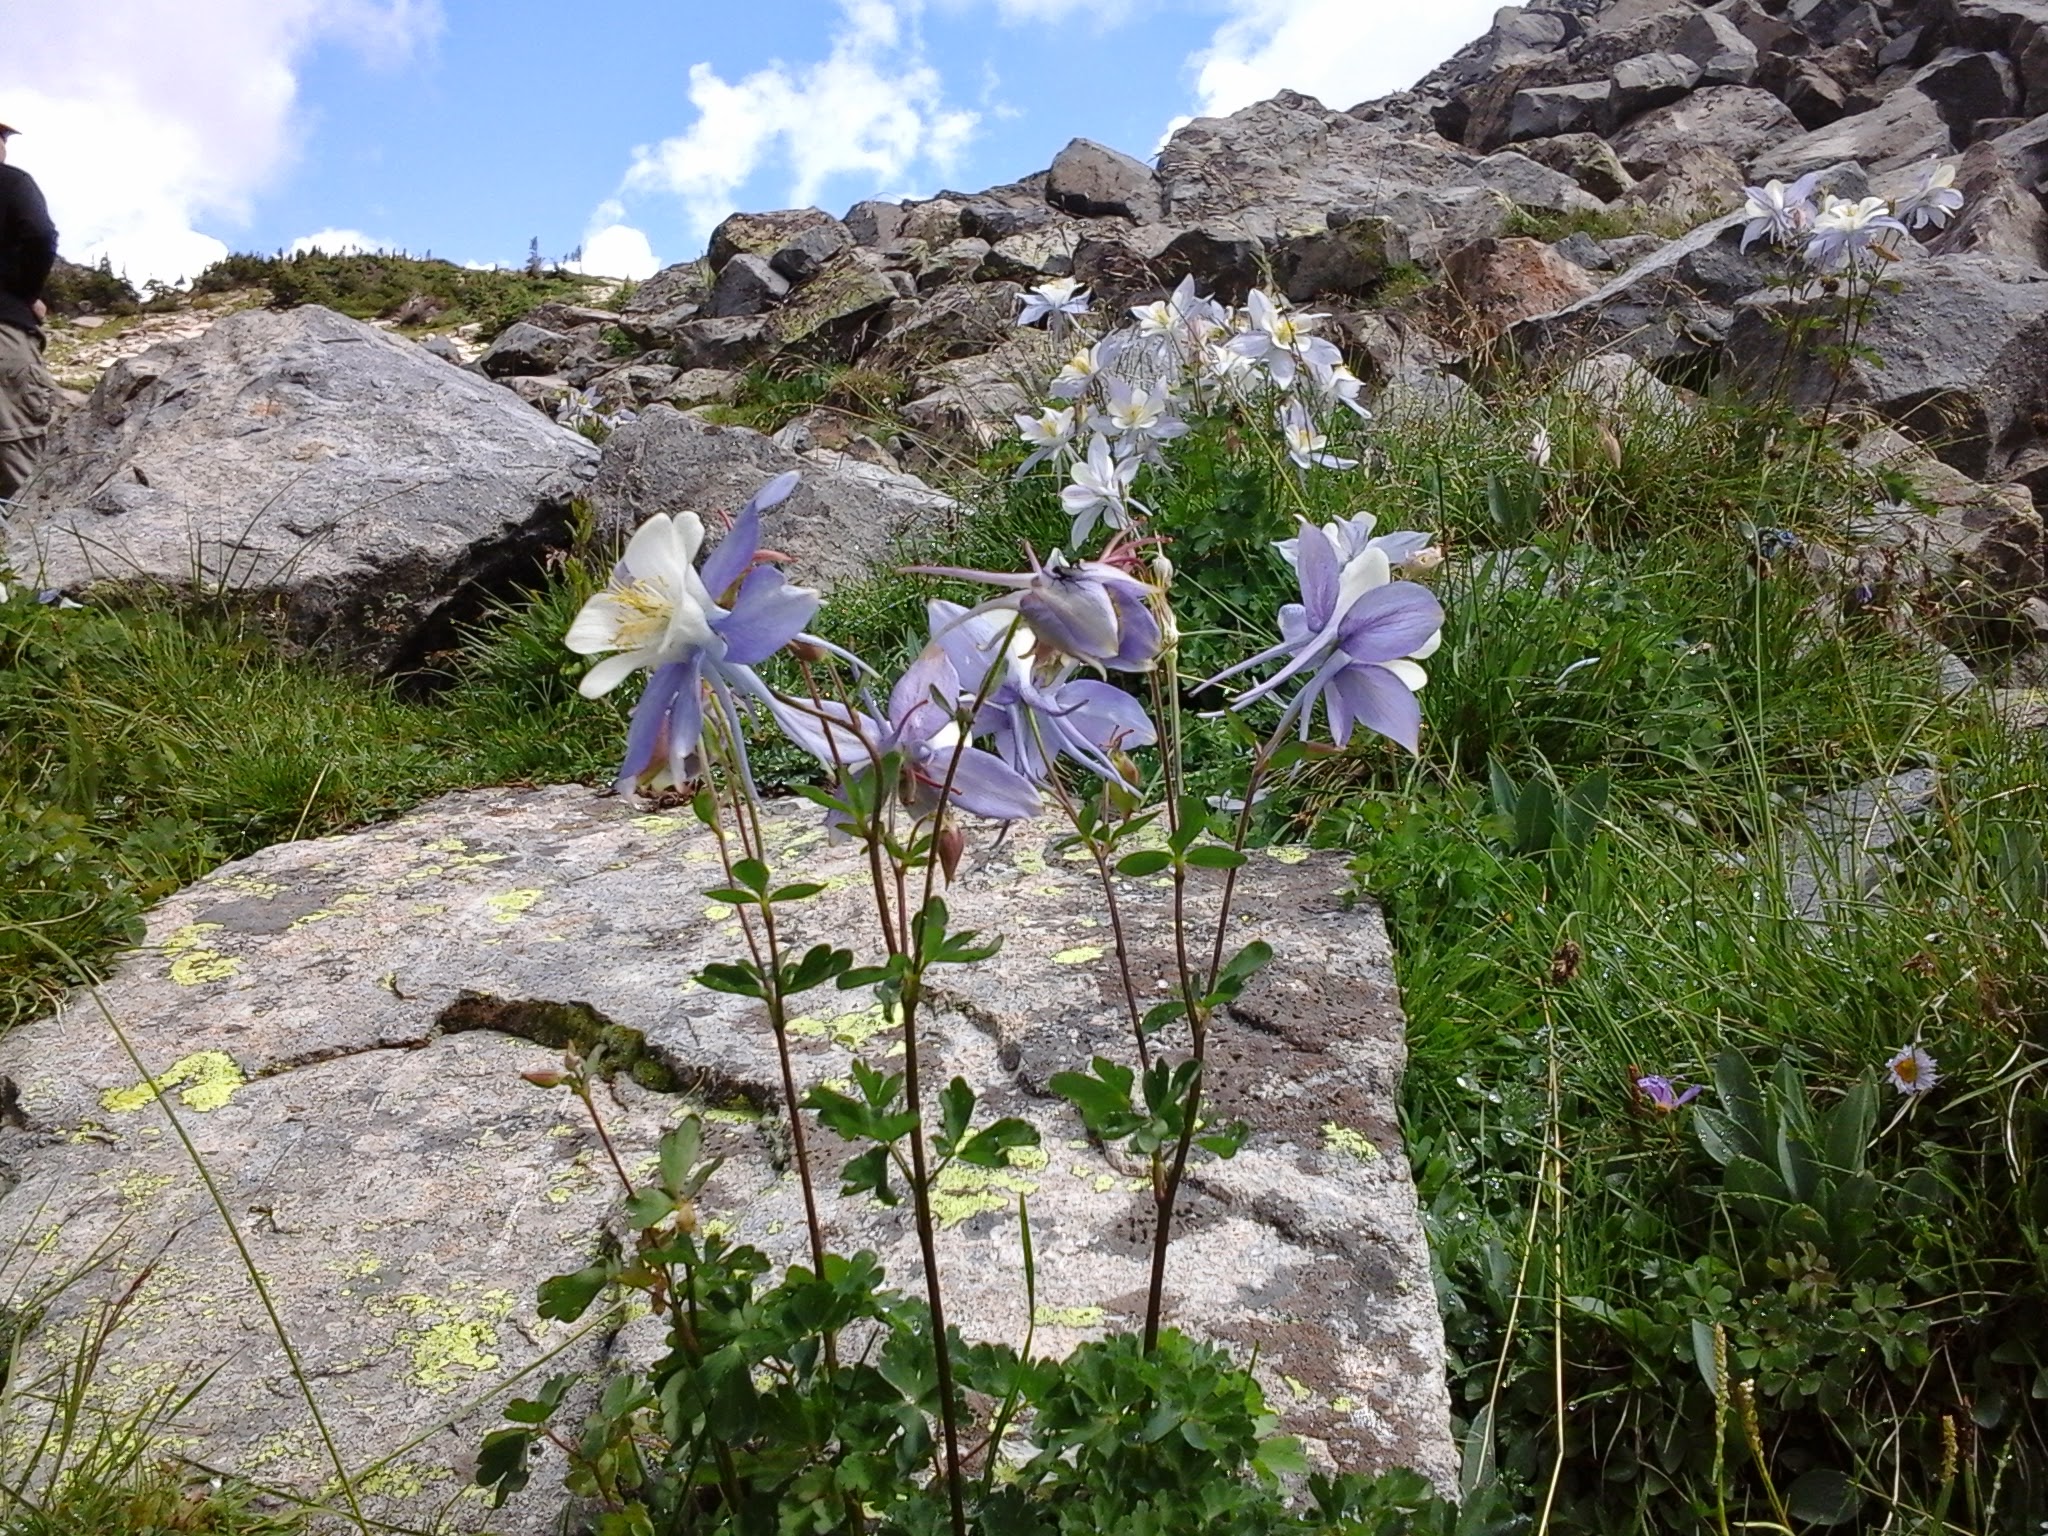 Columbines blooming in the rocky mountains.